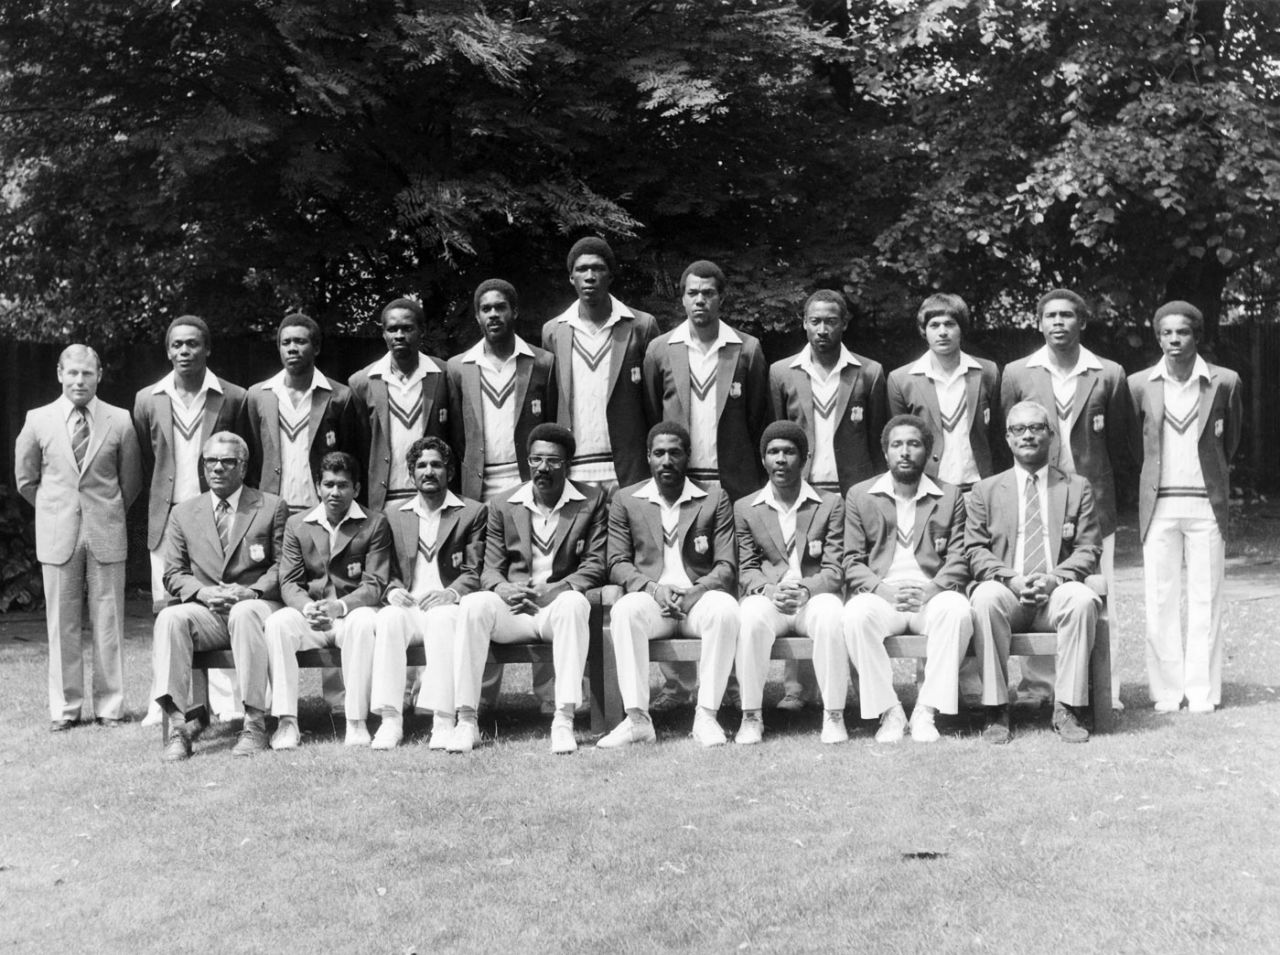 The West Indies squad on tour in England. Back row (left to right): physio DJ Waight, Desmond Haynes, Malcolm Marshall, Collis King, Michael Holding, Joel Garner, Colin Croft, D Parrey, Faoud Bacchus, Gordon Greenidge and David Murray. Front row: manager Clyde Walcott, Alvin Kallicharran, Deryck Murray, Clive Lloyd (captain), Viv Richards, Lawrence Rowe, Andy Roberts, and assistant manager Cammie Smith, June 1980